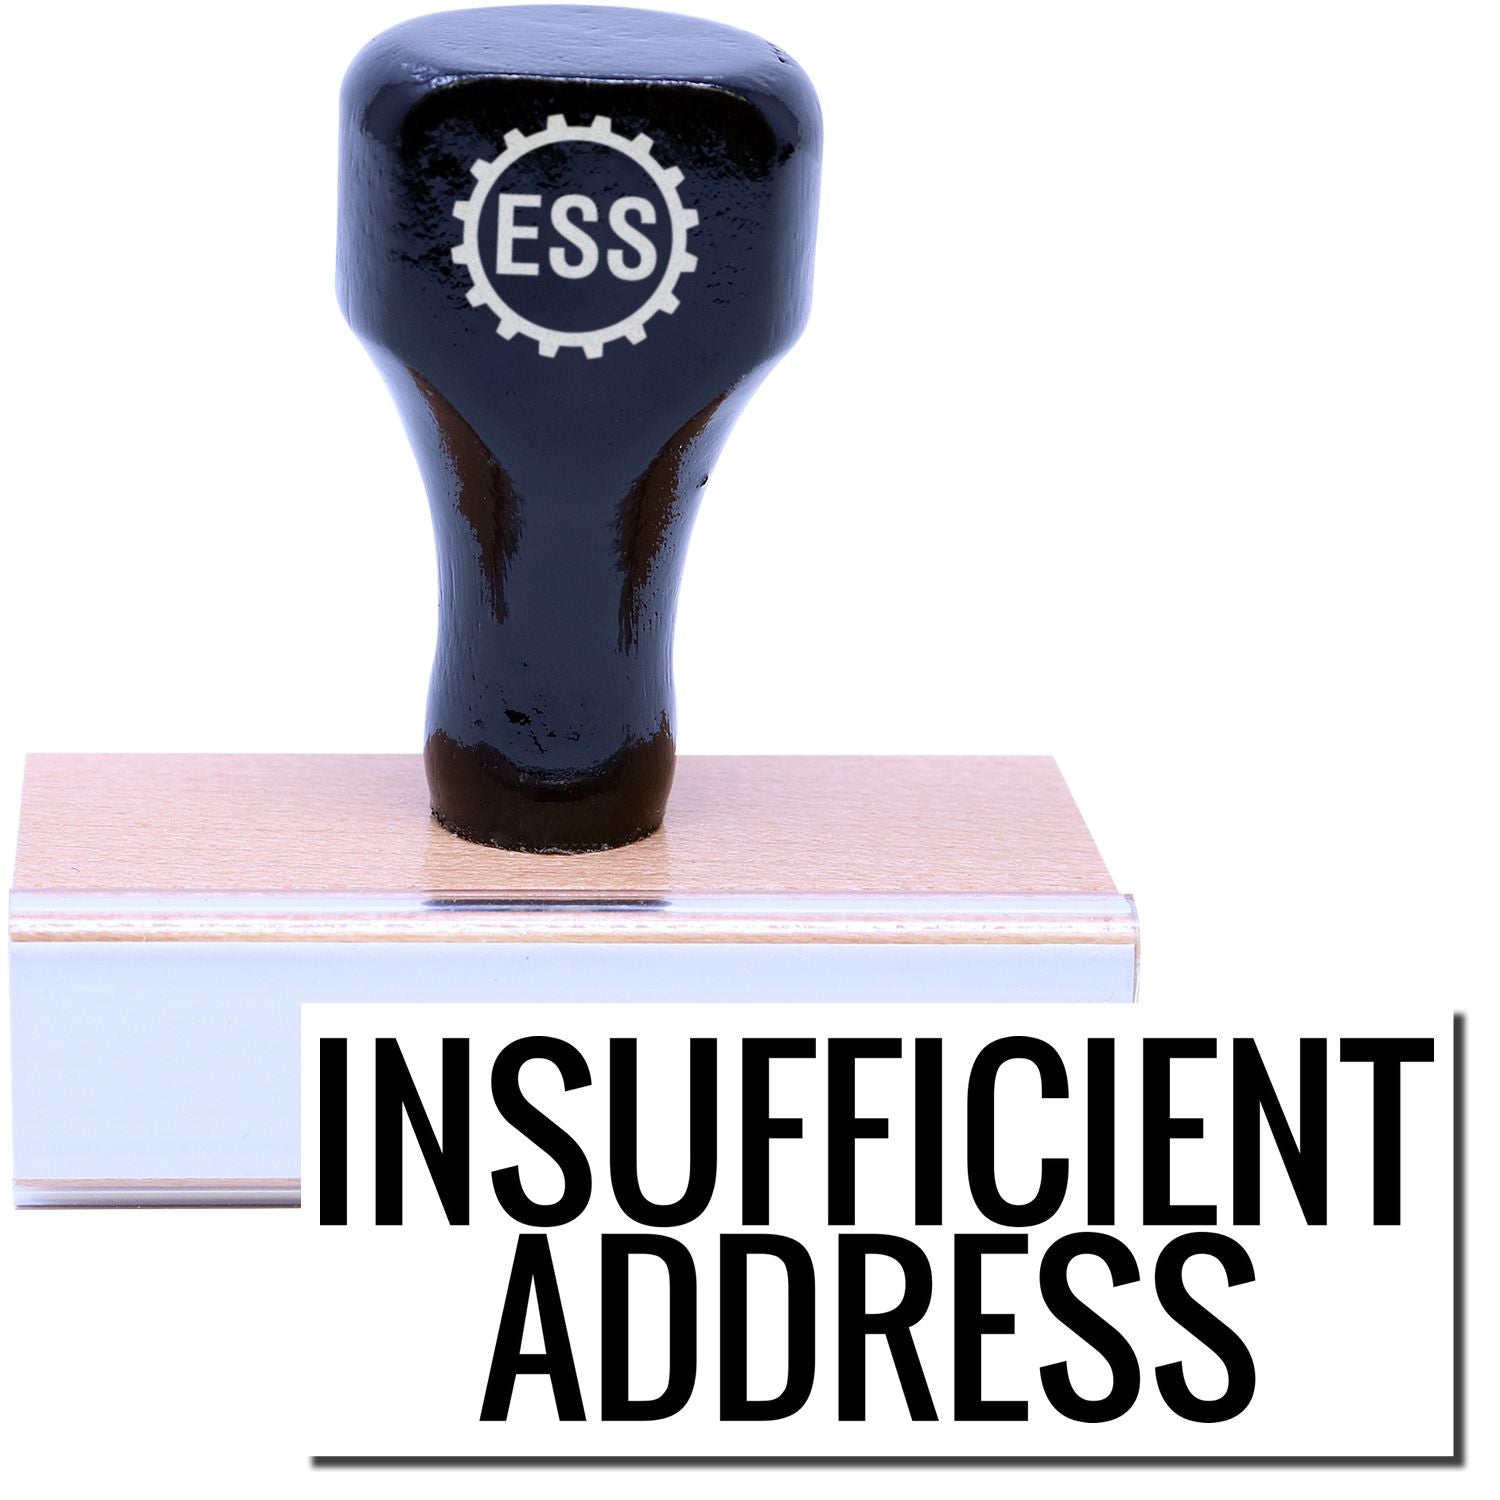 A stock office rubber stamp with a stamped image showing how the text "INSUFFICIENT ADDRESS" in a large font is displayed after stamping.